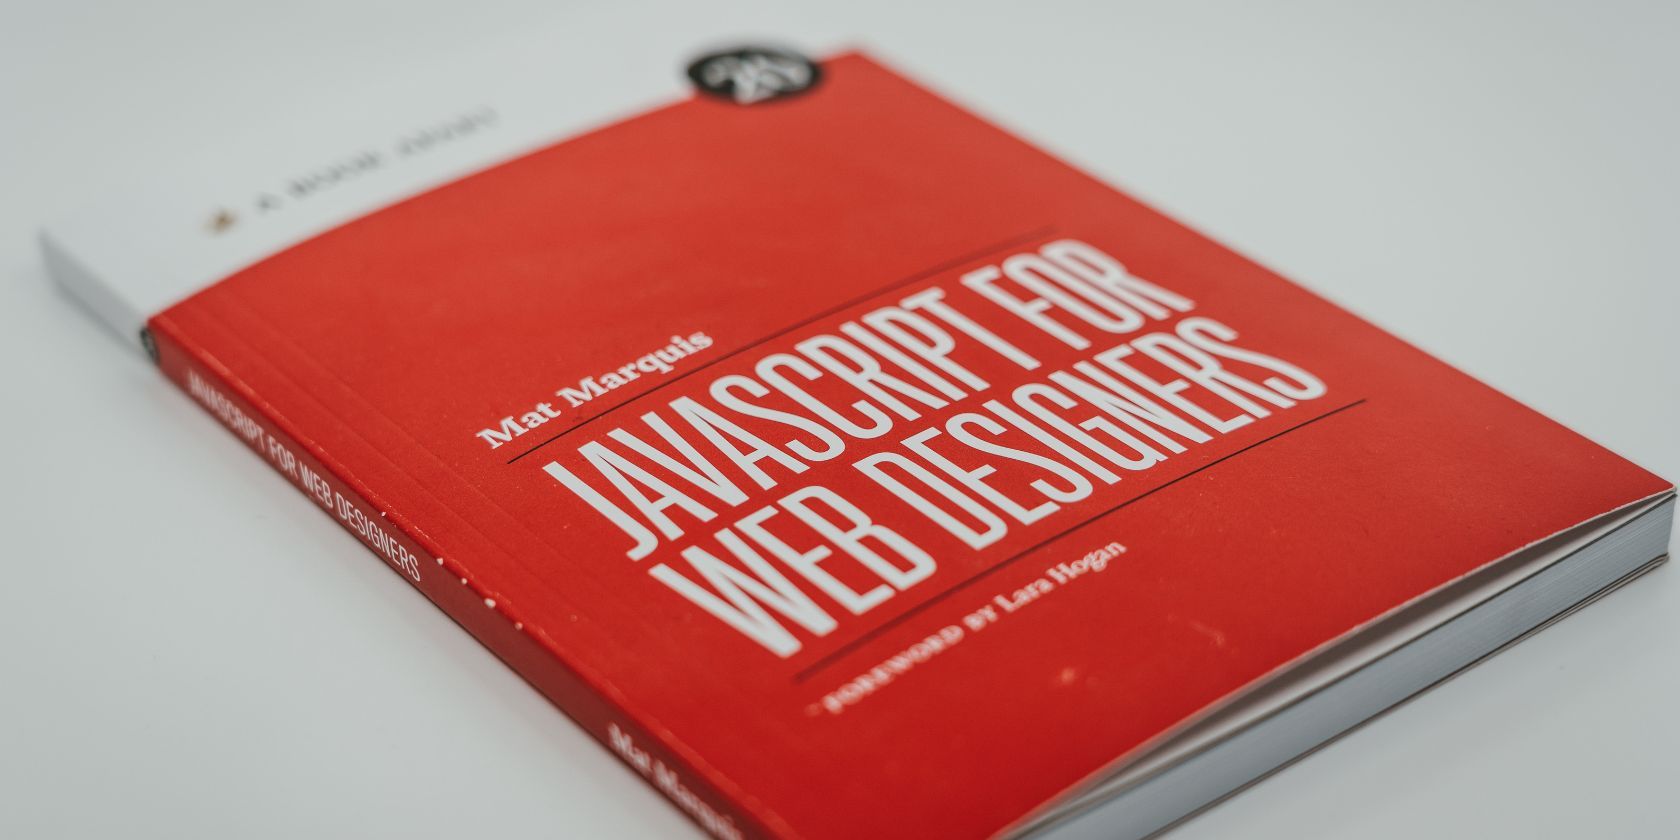 A book with a red cover titled “Javascript for Web Designers”